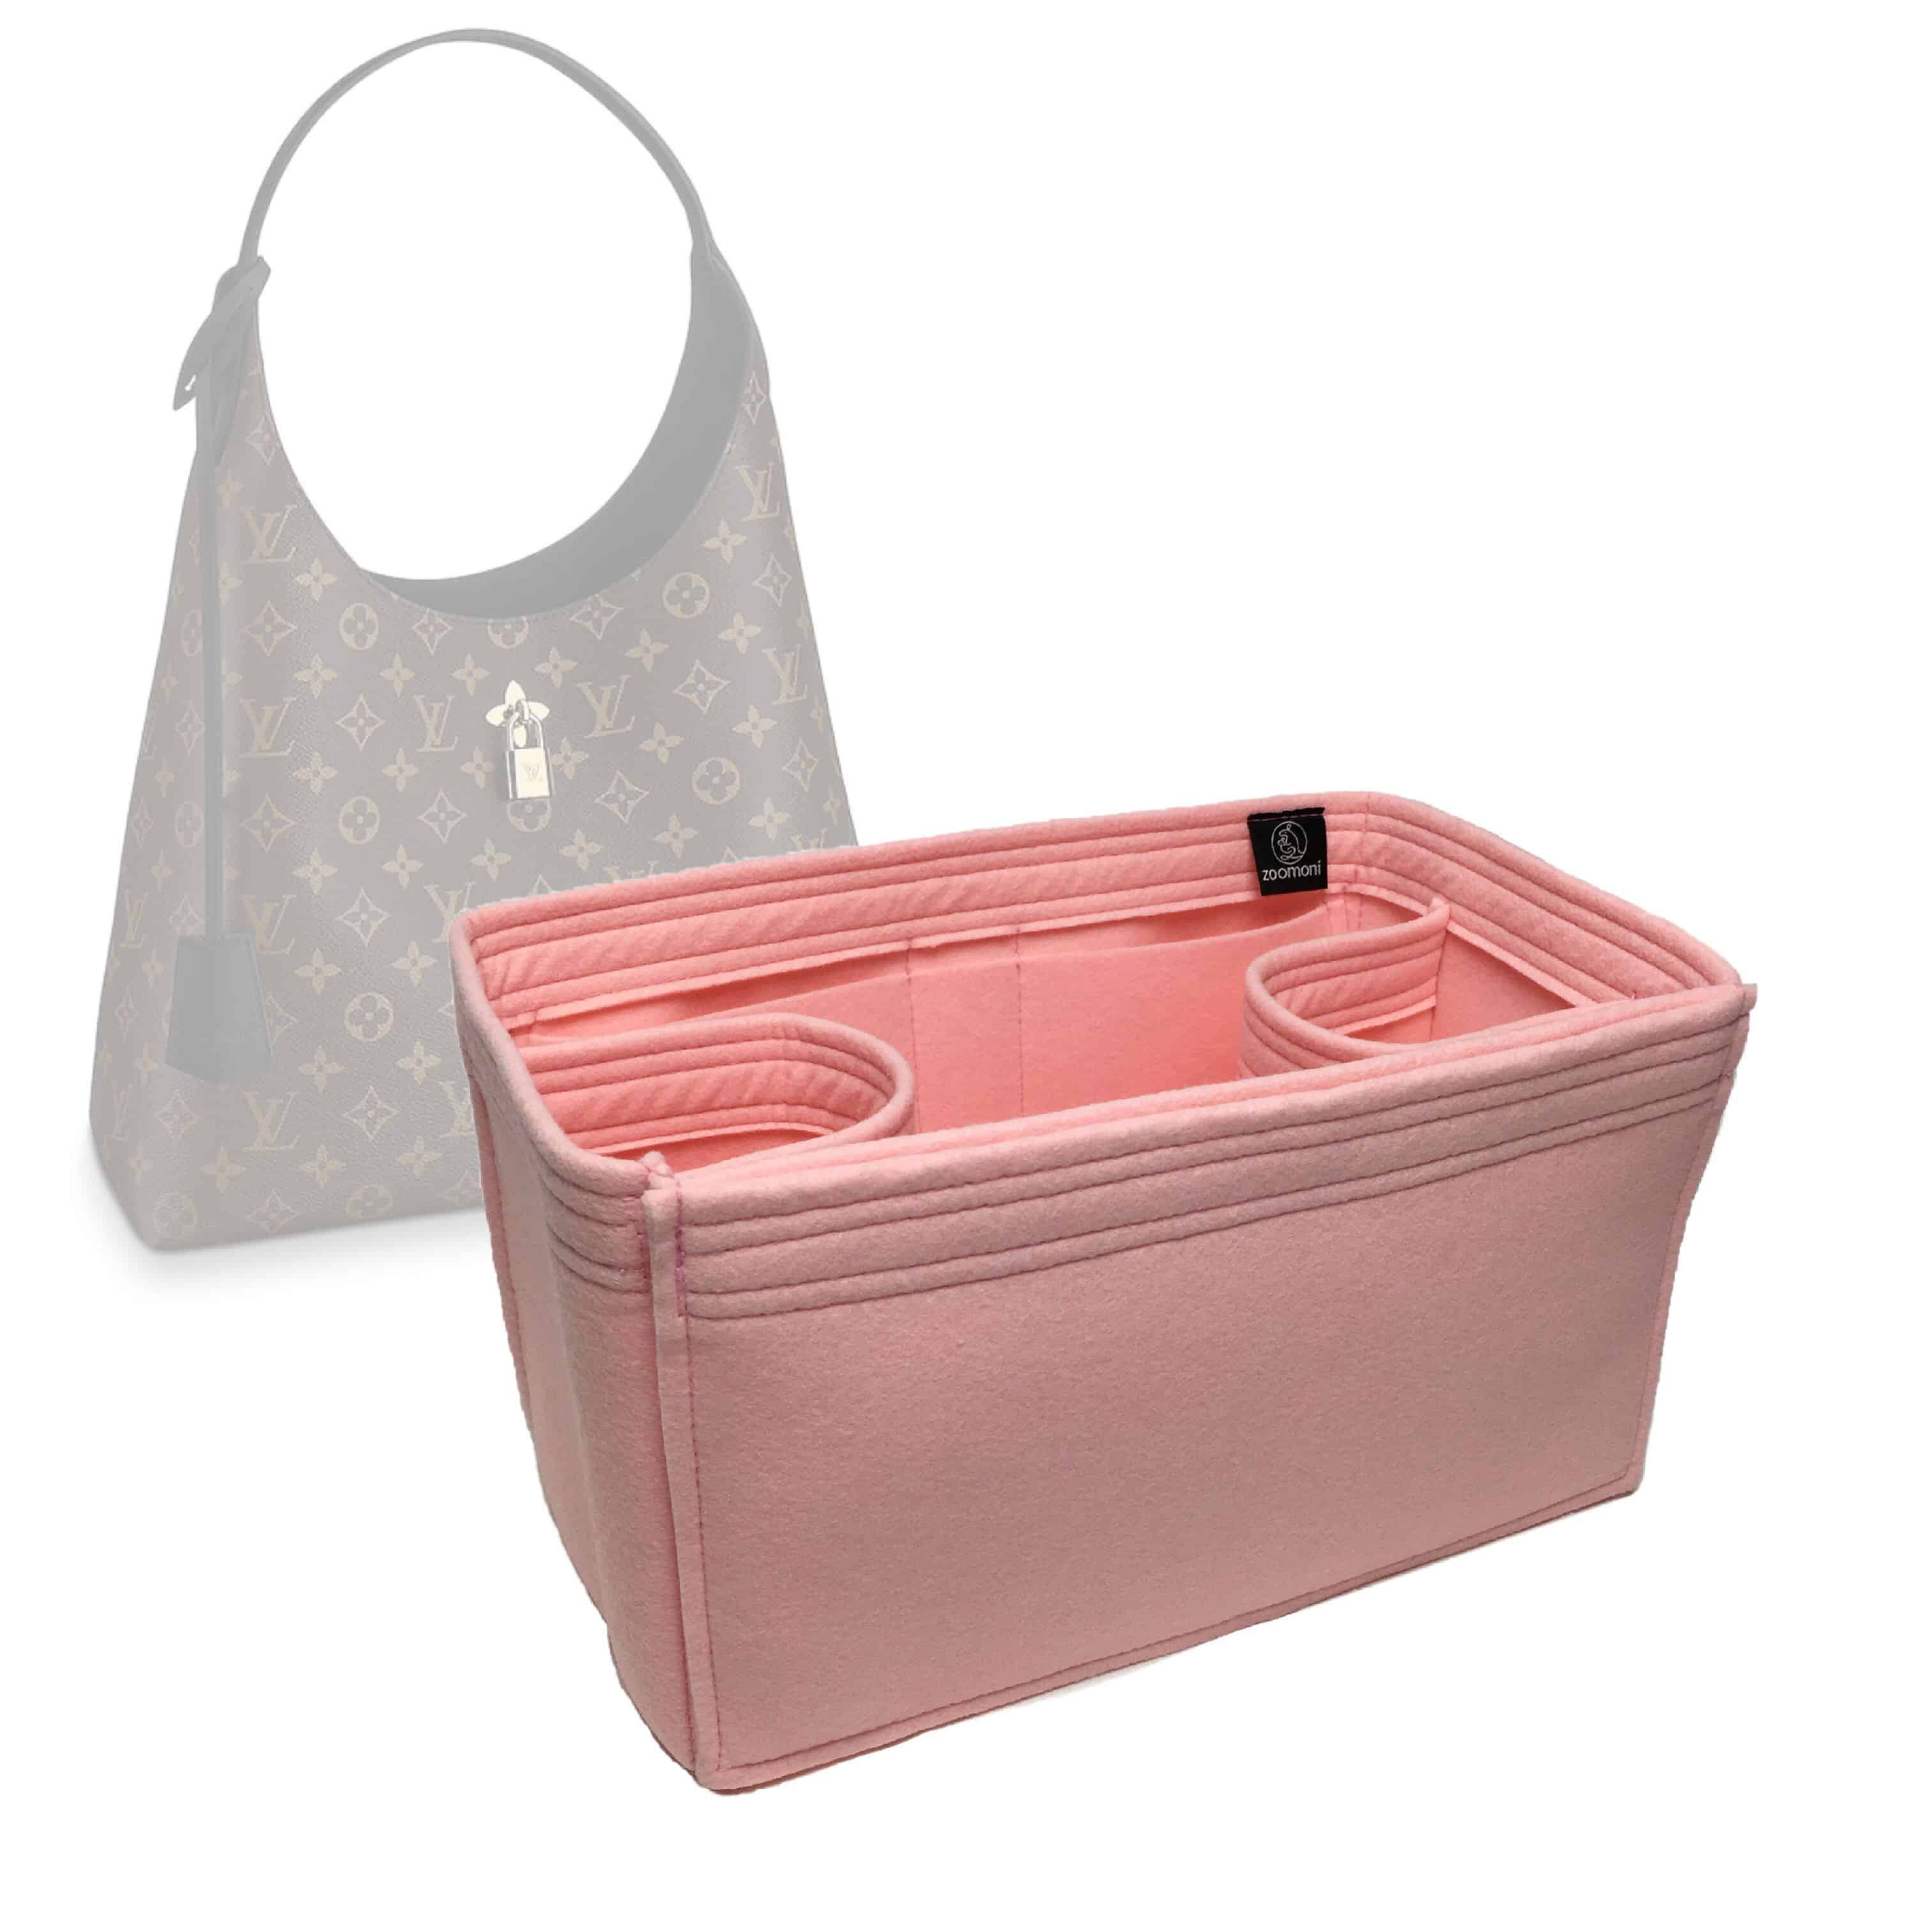 I am in love with my pink luggage set and my Louis Vuitton Artsy MM